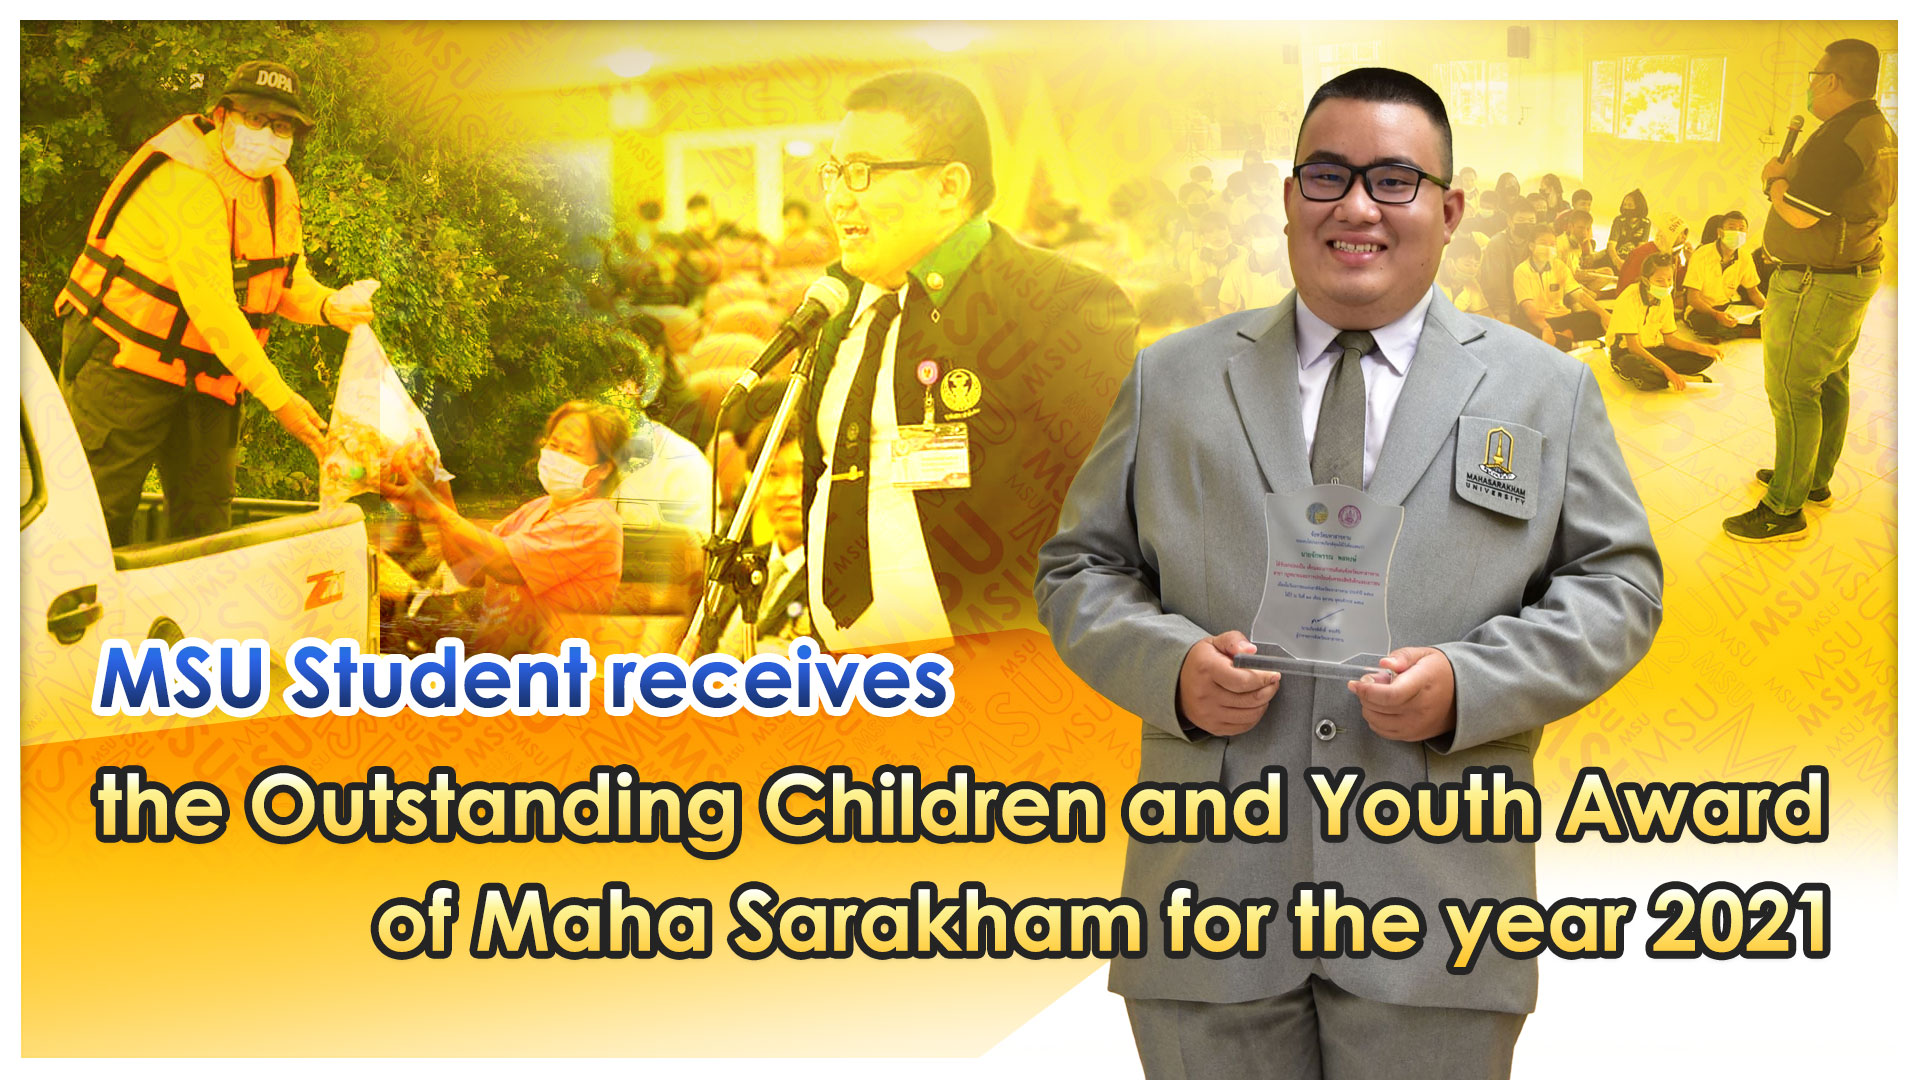 MSU Student receives the Outstanding Children and Youth Award of Maha Sarakham for the year 2021